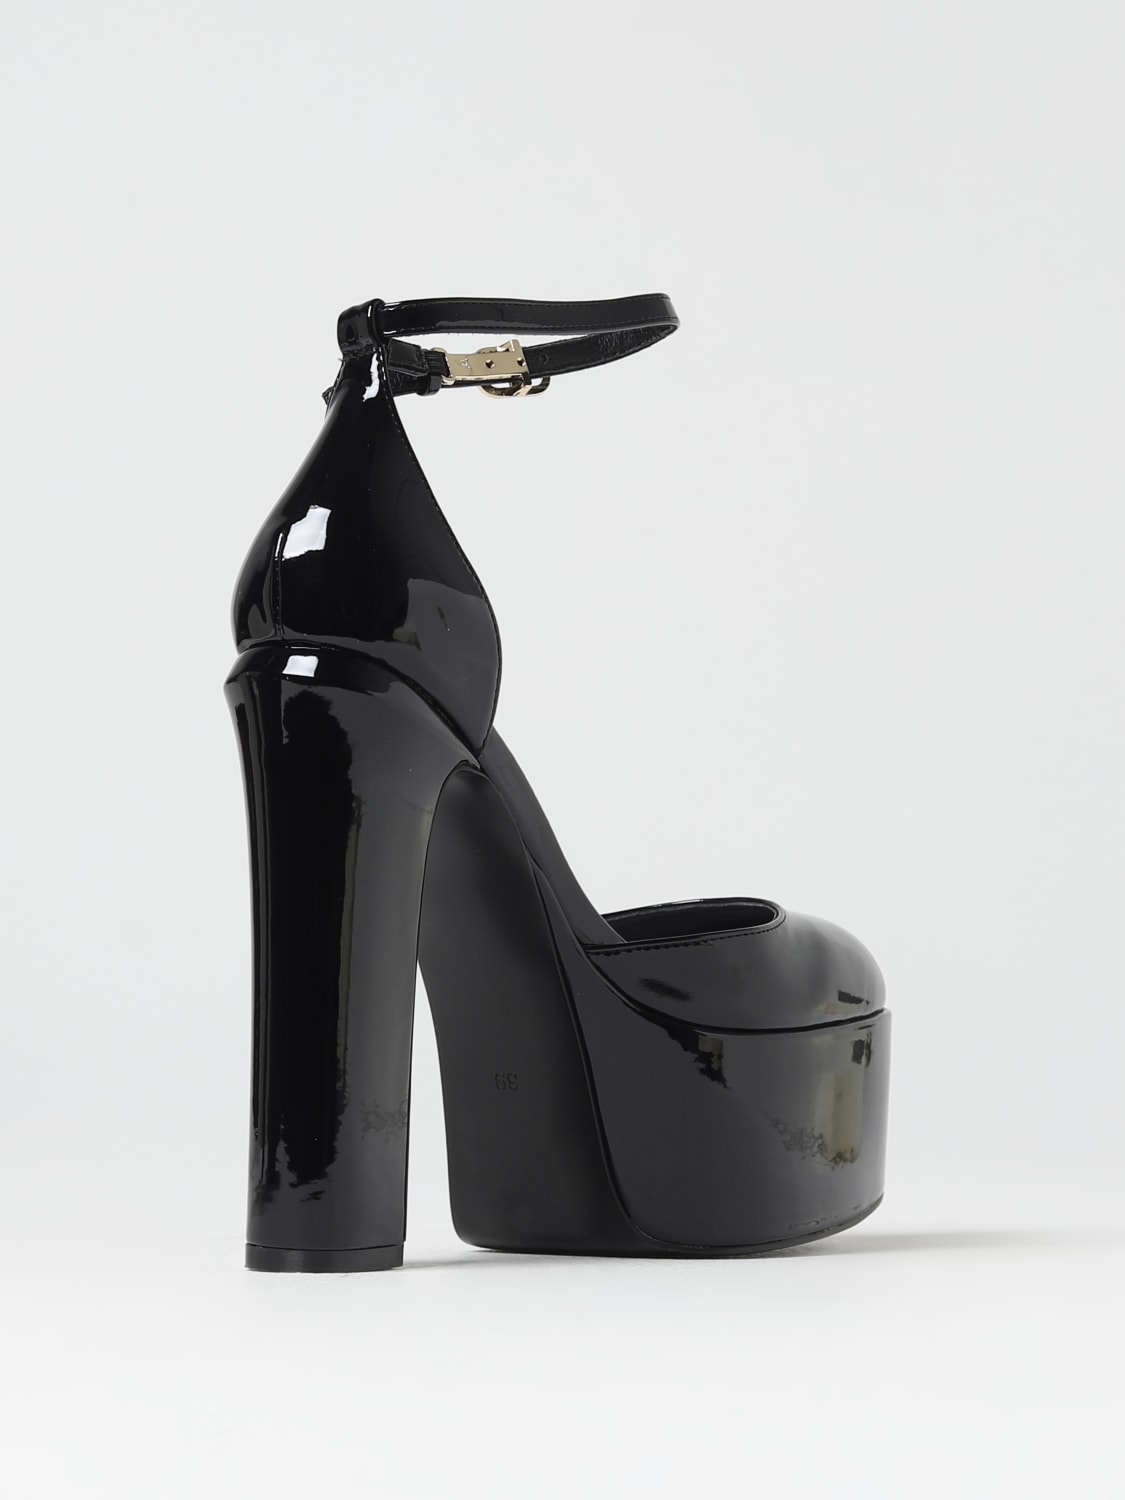 Mary Jane Heeled Pumps for Women Black Patent || Ankle Strap Mary Jane Shoes Leather Block Heels